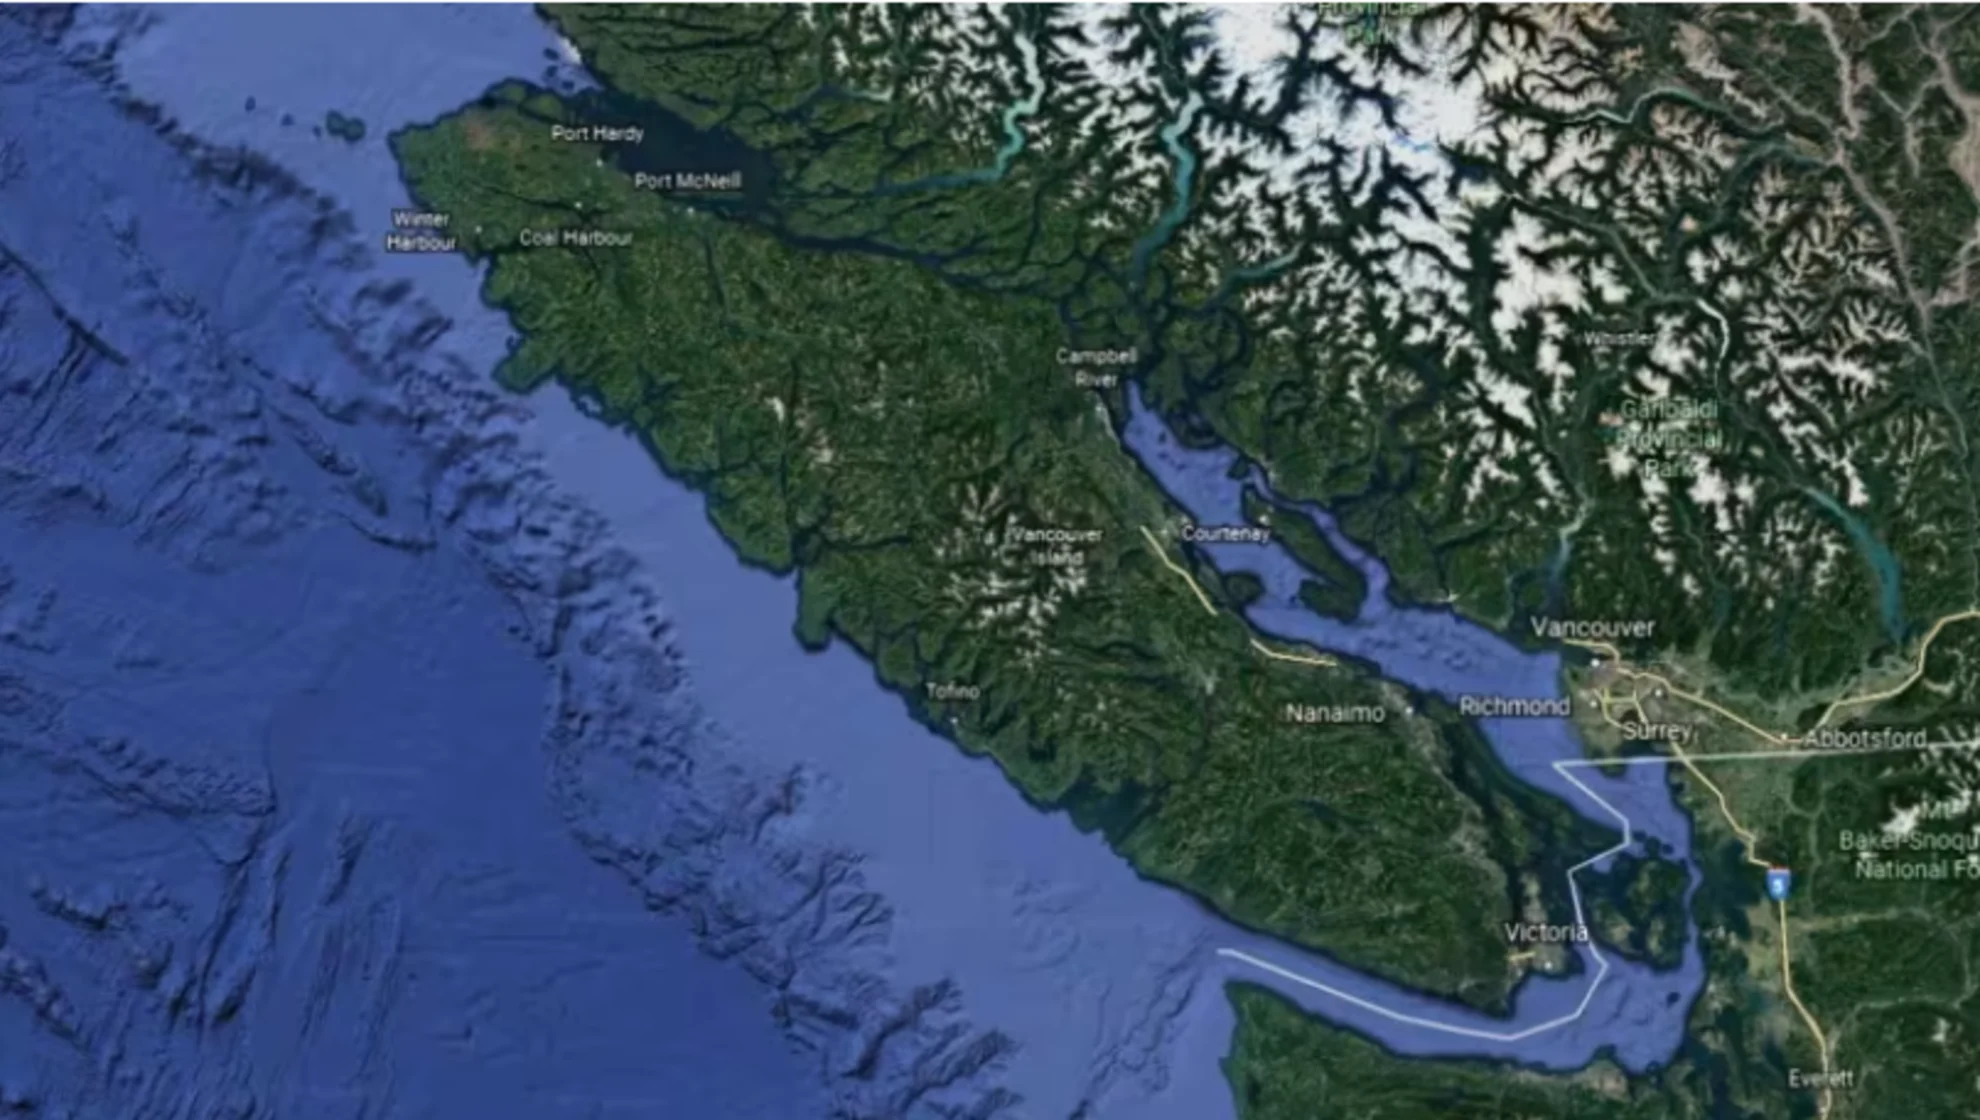 New research highlights where 'The Big One' earthquake could hit, and it's close to Vancouver Island. See it, here